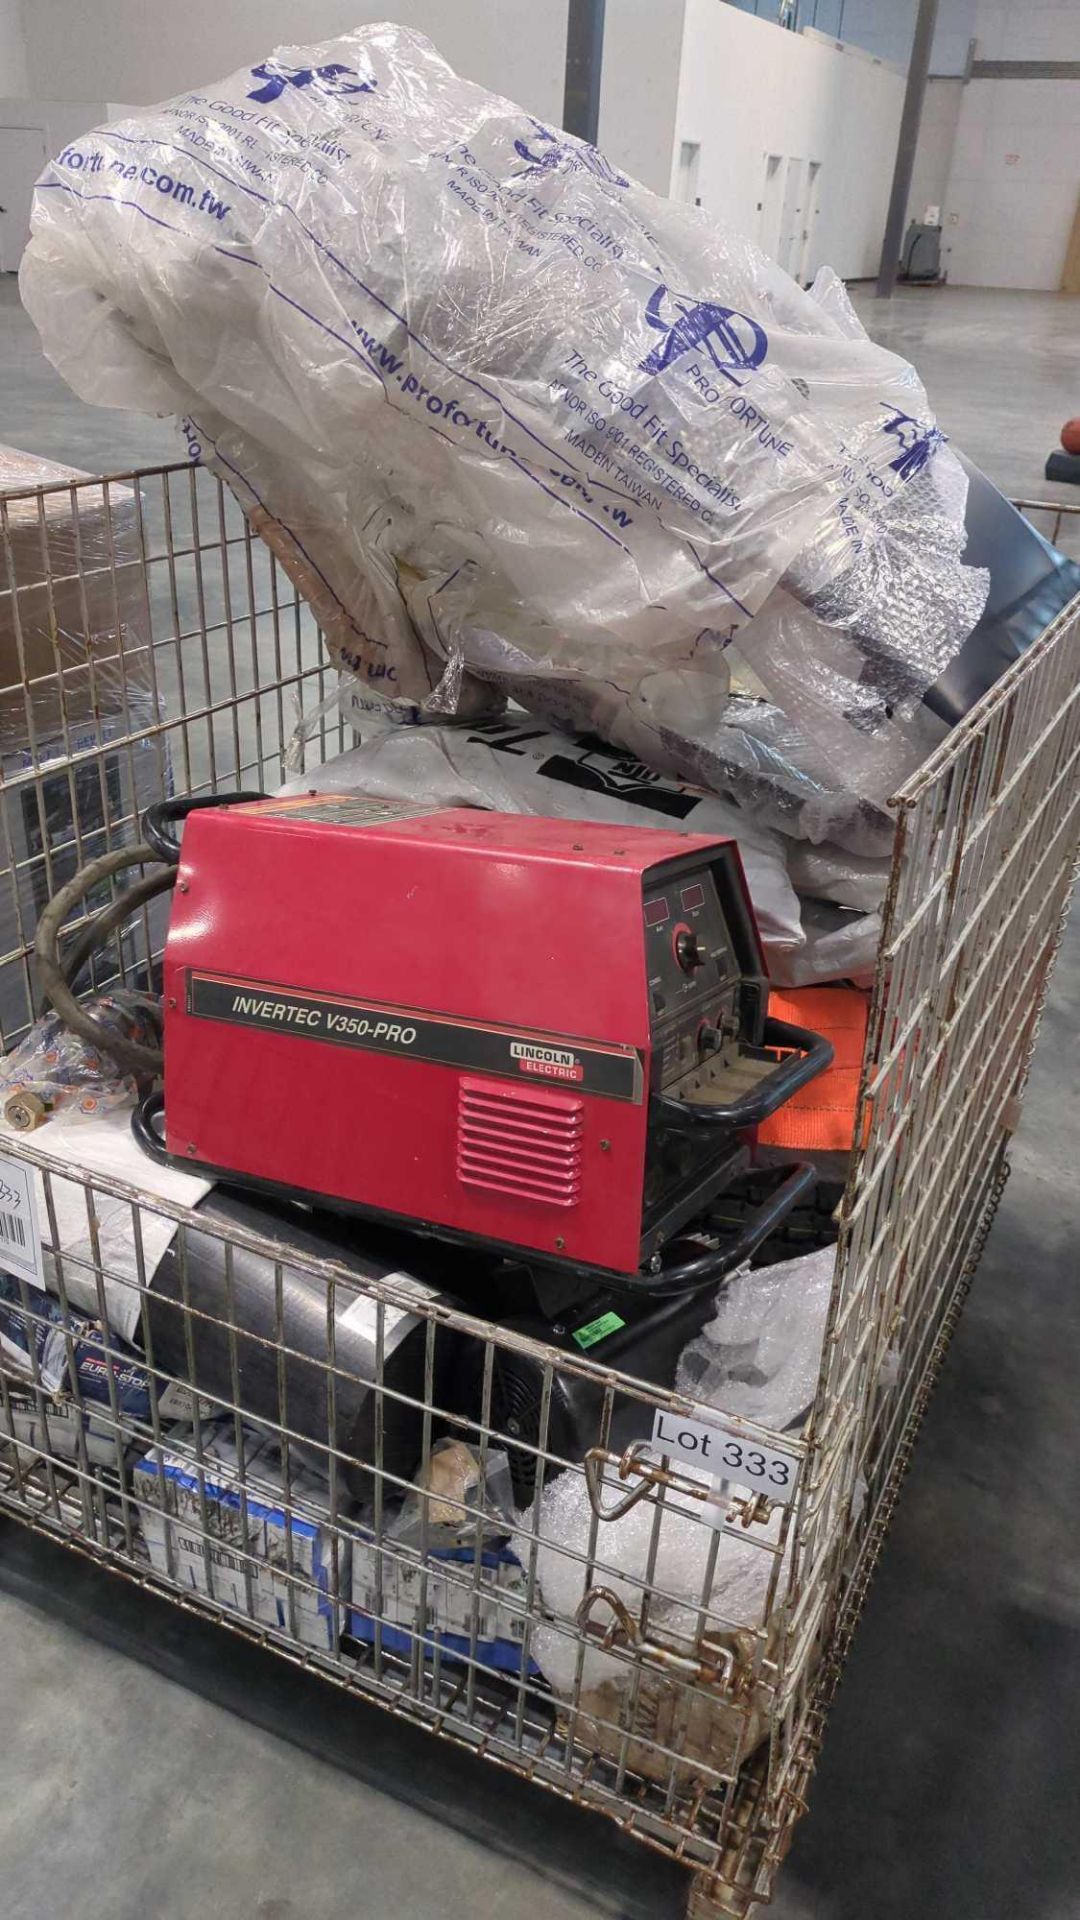 Wire bin- Inverter V350-pro, car parts, straps, tire and more - Image 4 of 4